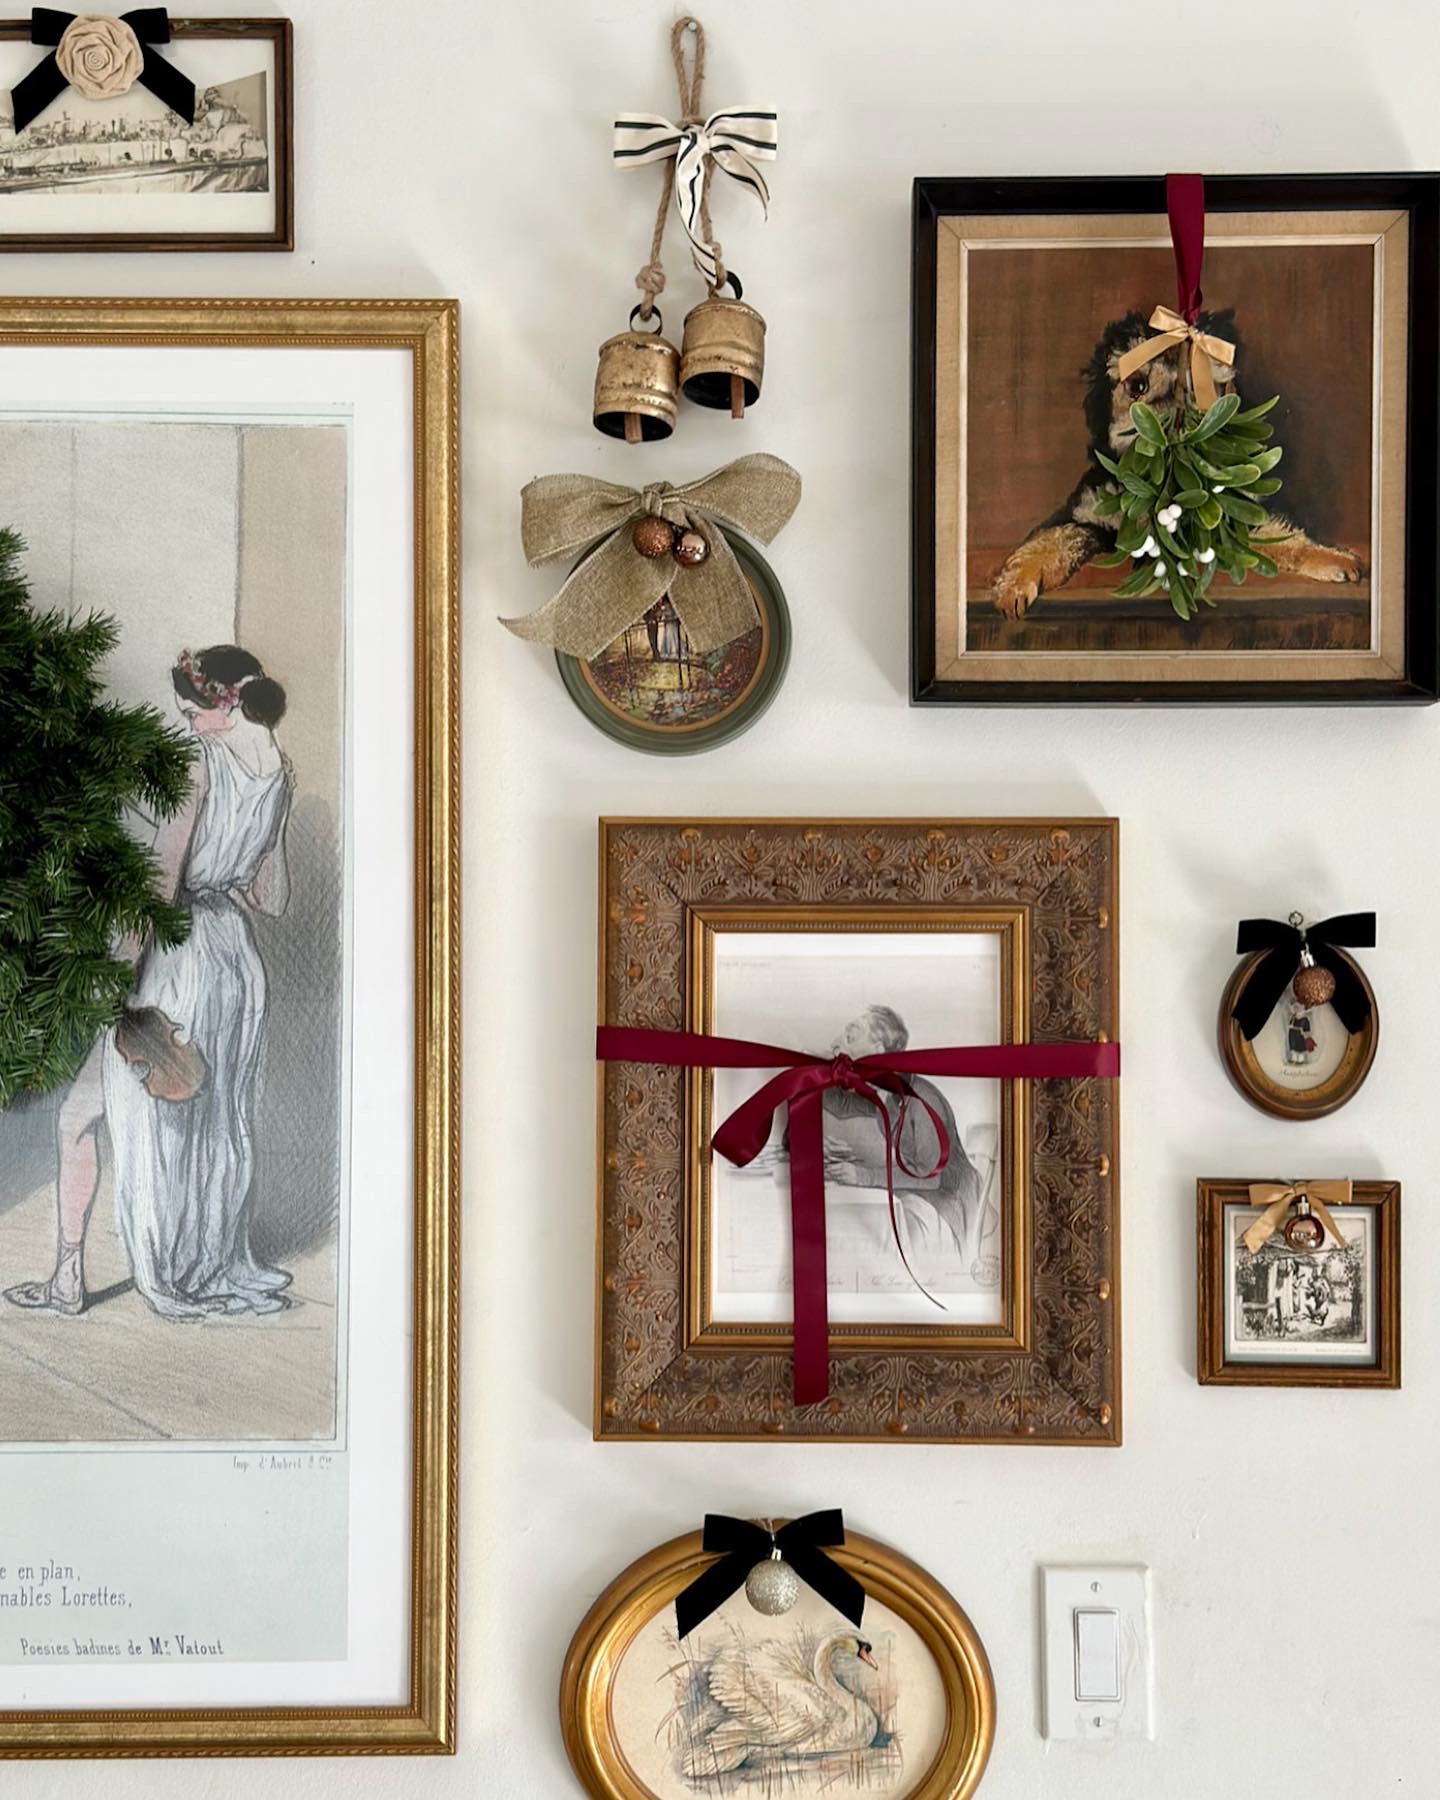 easy and budget friendly ways to decorate for christmas, decorating with bows, decorating art for christmas, christmas decor ideas, bows on frames, decorating art for christmas, christmas diy, framing wrapping paper, decorating gallery wall for christmas, bows on art, wreath on art